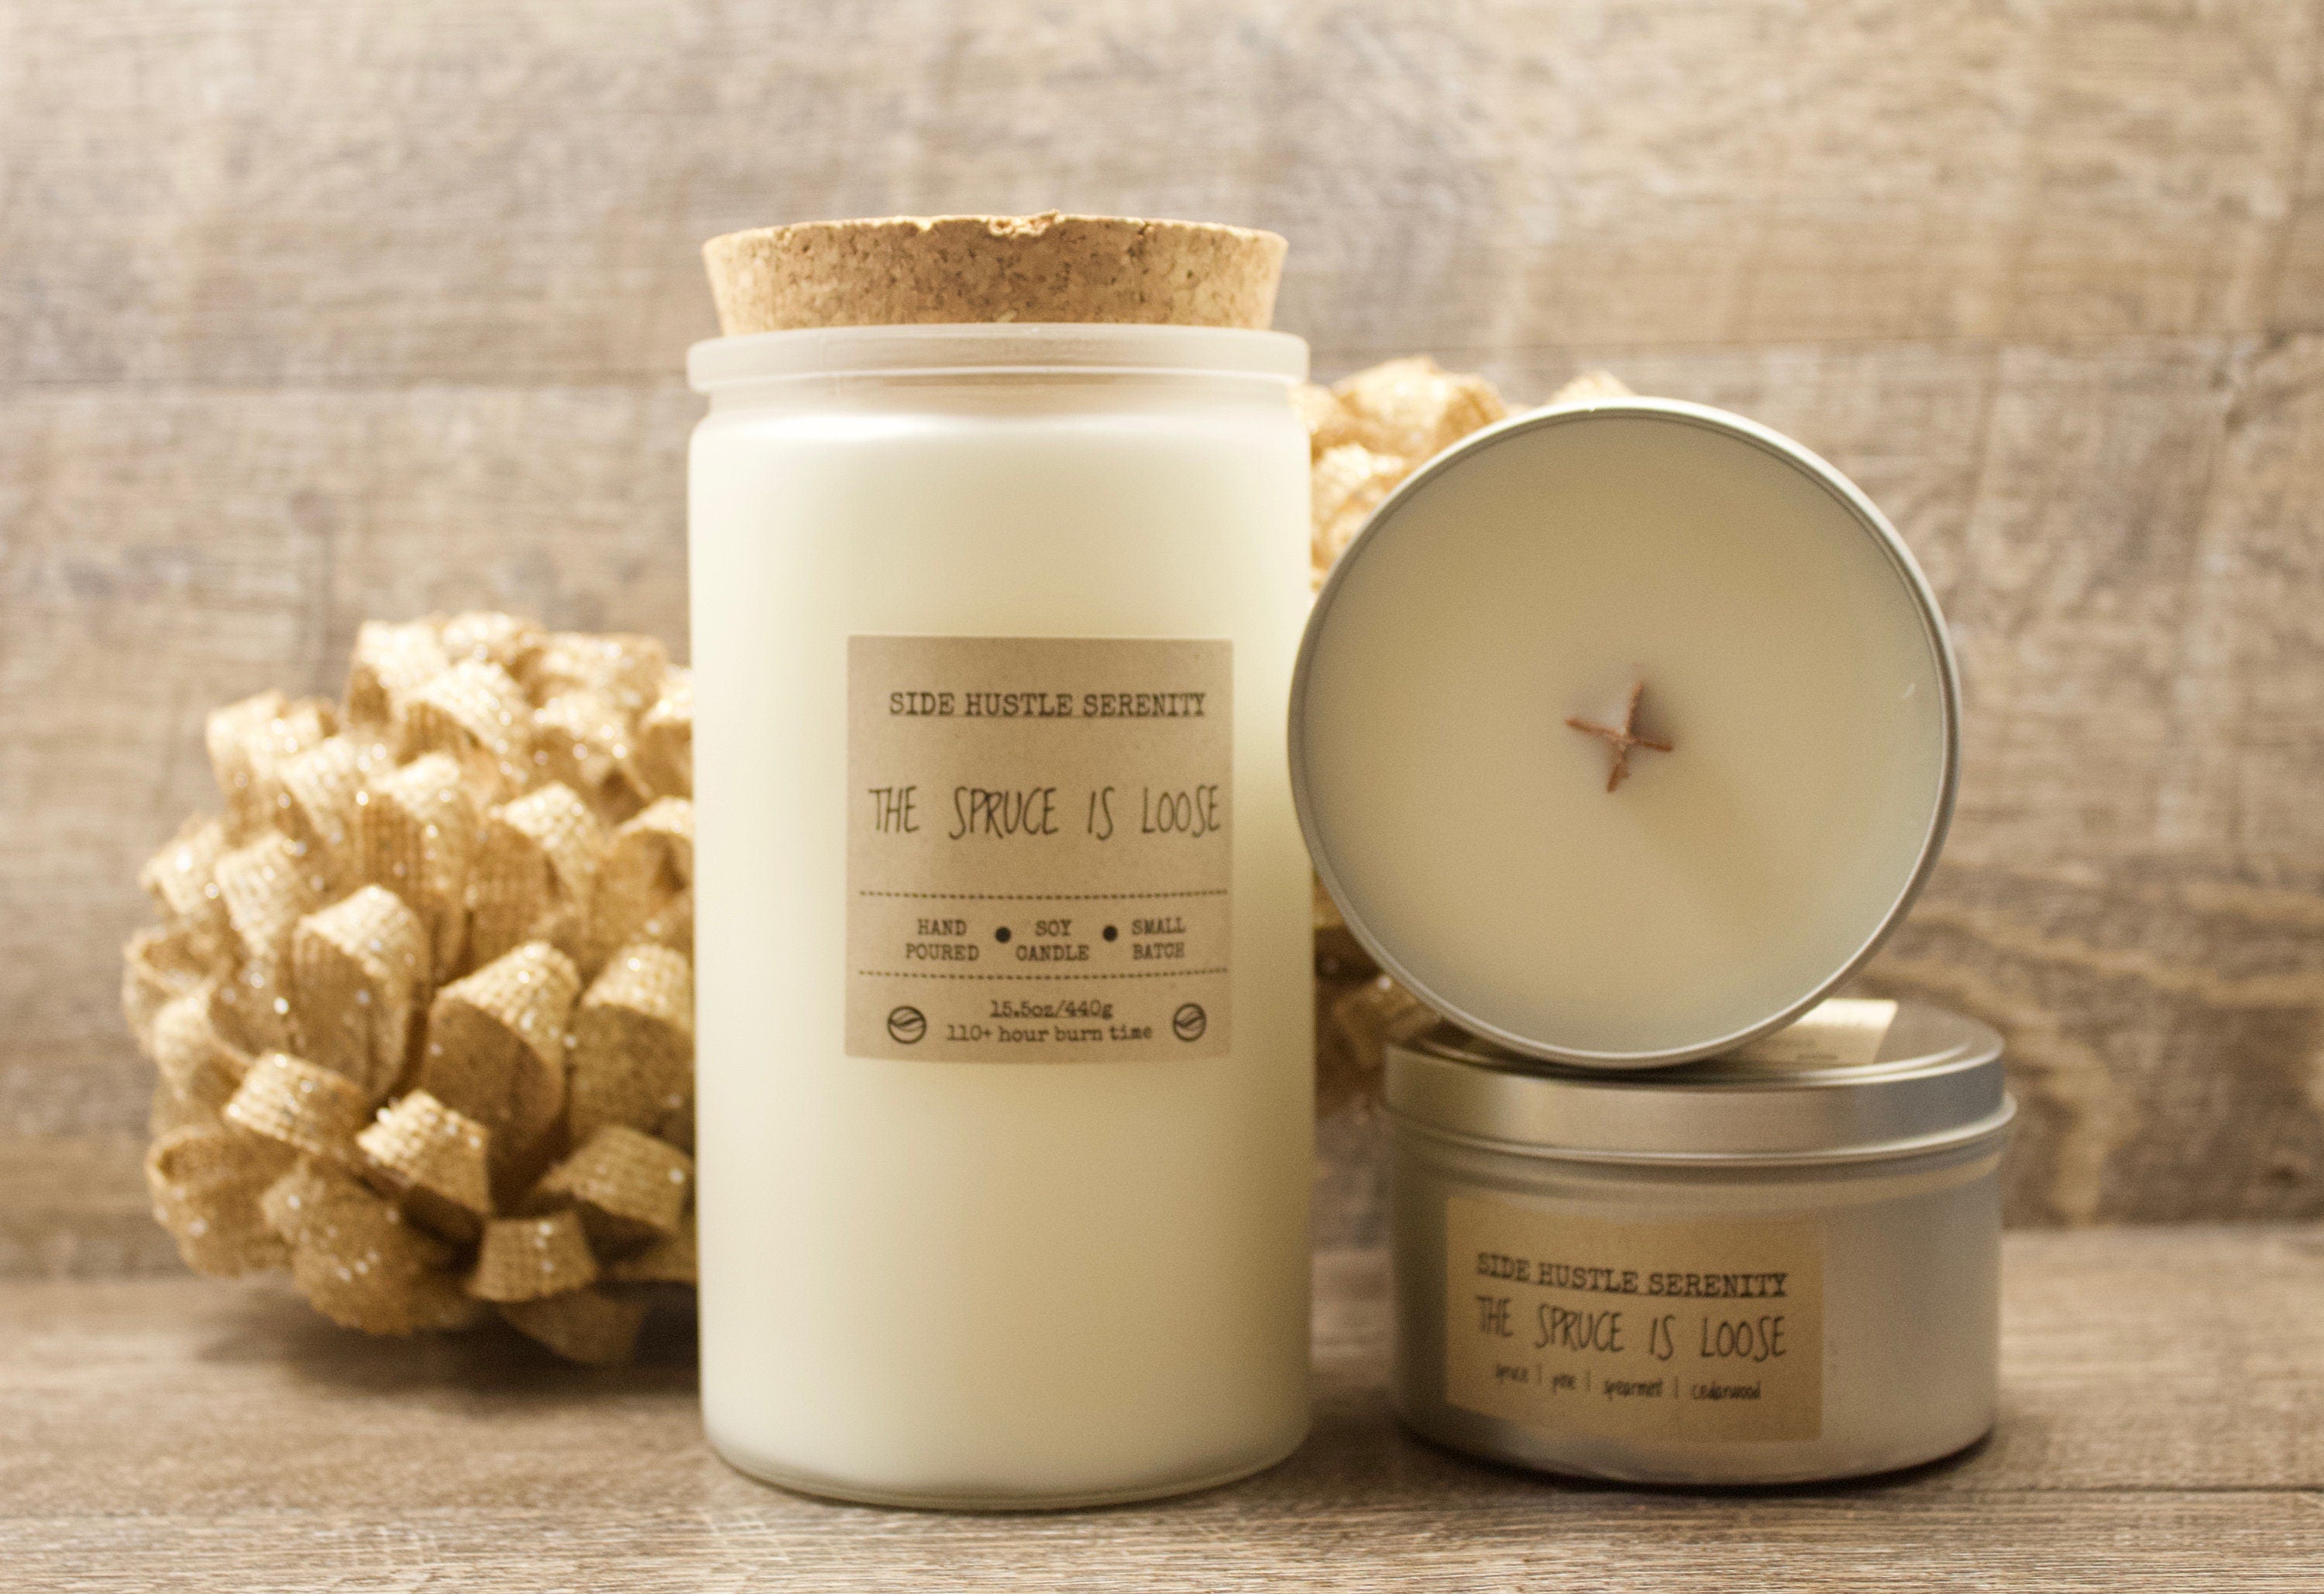 The Spruce Is Loose | Blue Spruce Scented Soy Candle | 15.5oz Frosted White Glass Container | Wood Wick | Merry Christmas Candle Gift